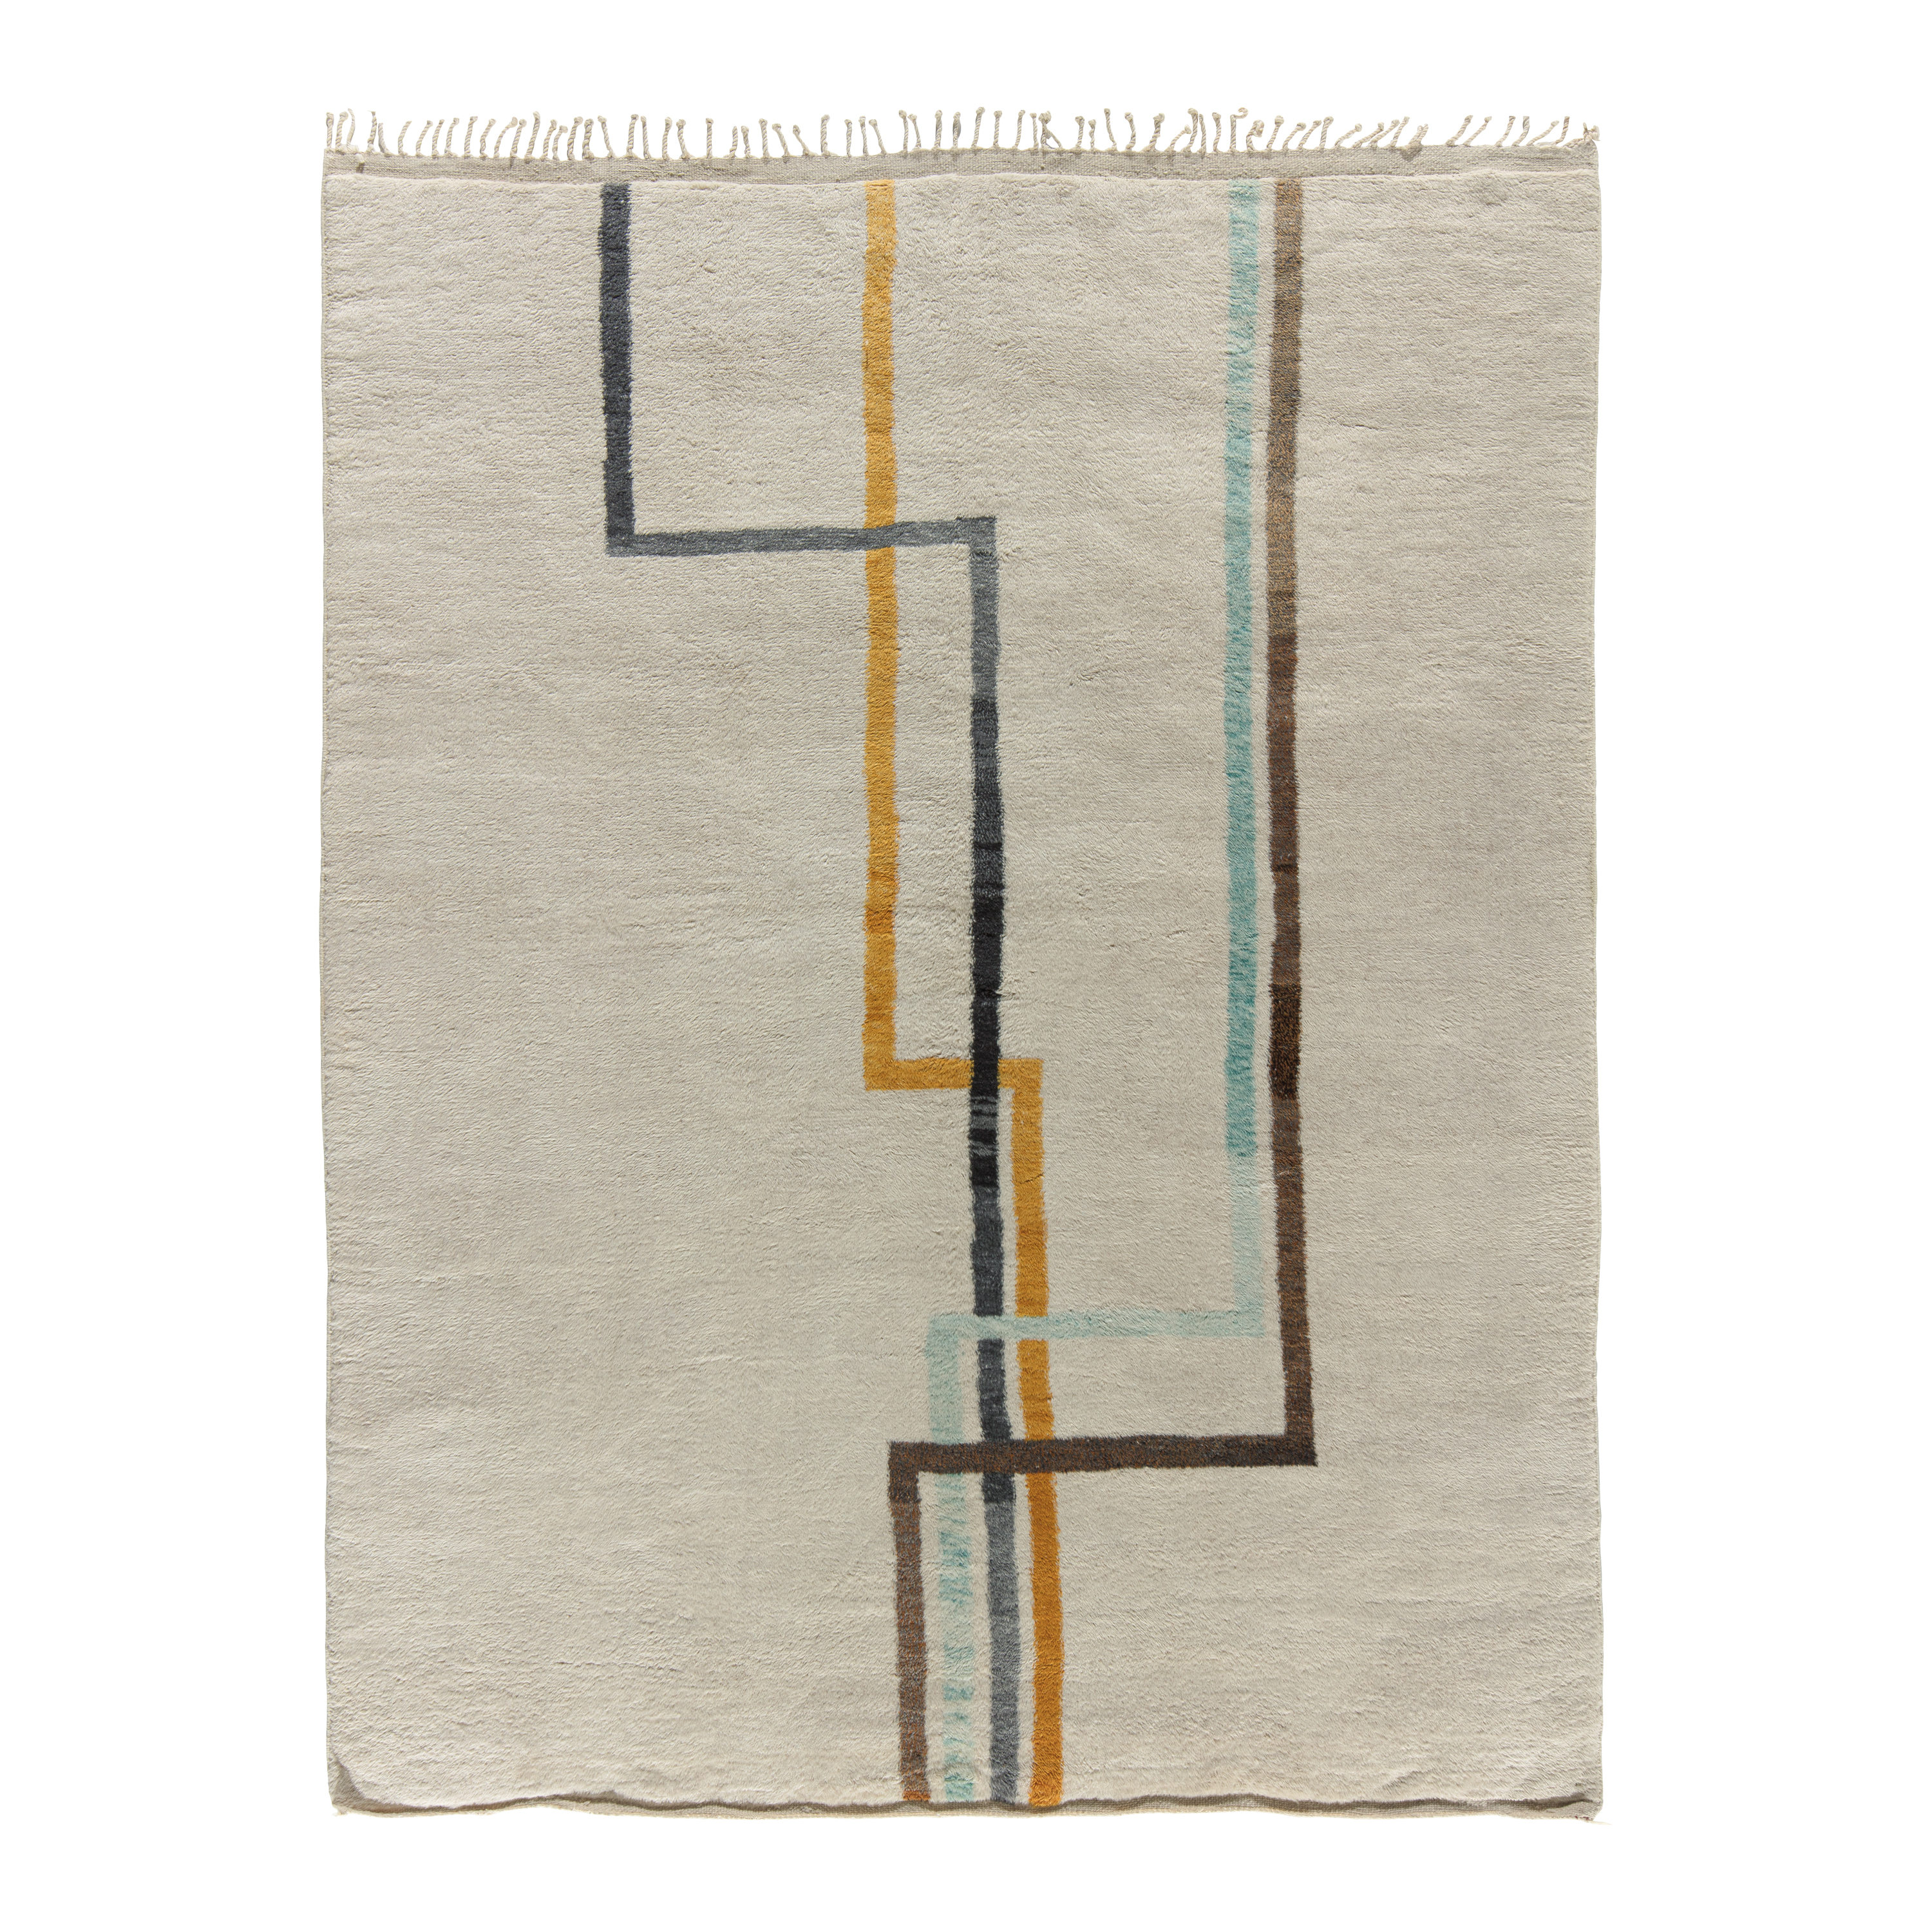 This original Modern Beni Ourain Moroccan rug is styled after the Beni Ourain rugs that were produced by the nomadic Berber tribes in North Africa for centuries.